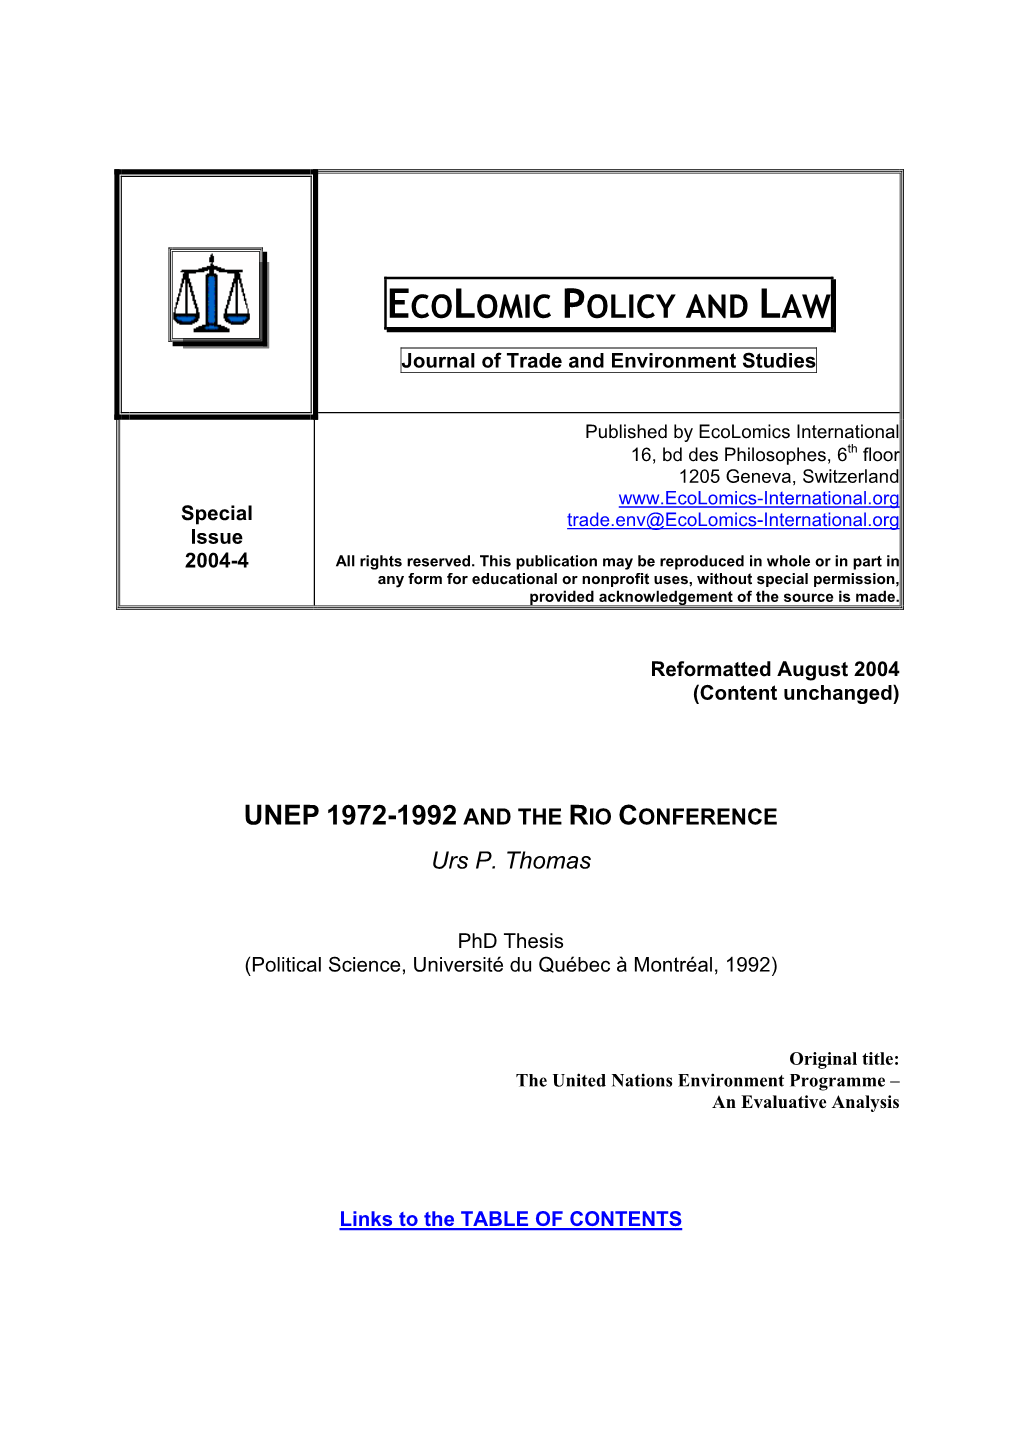 UNEP 1972-1992 and the Rio Conference, Phd Thesis